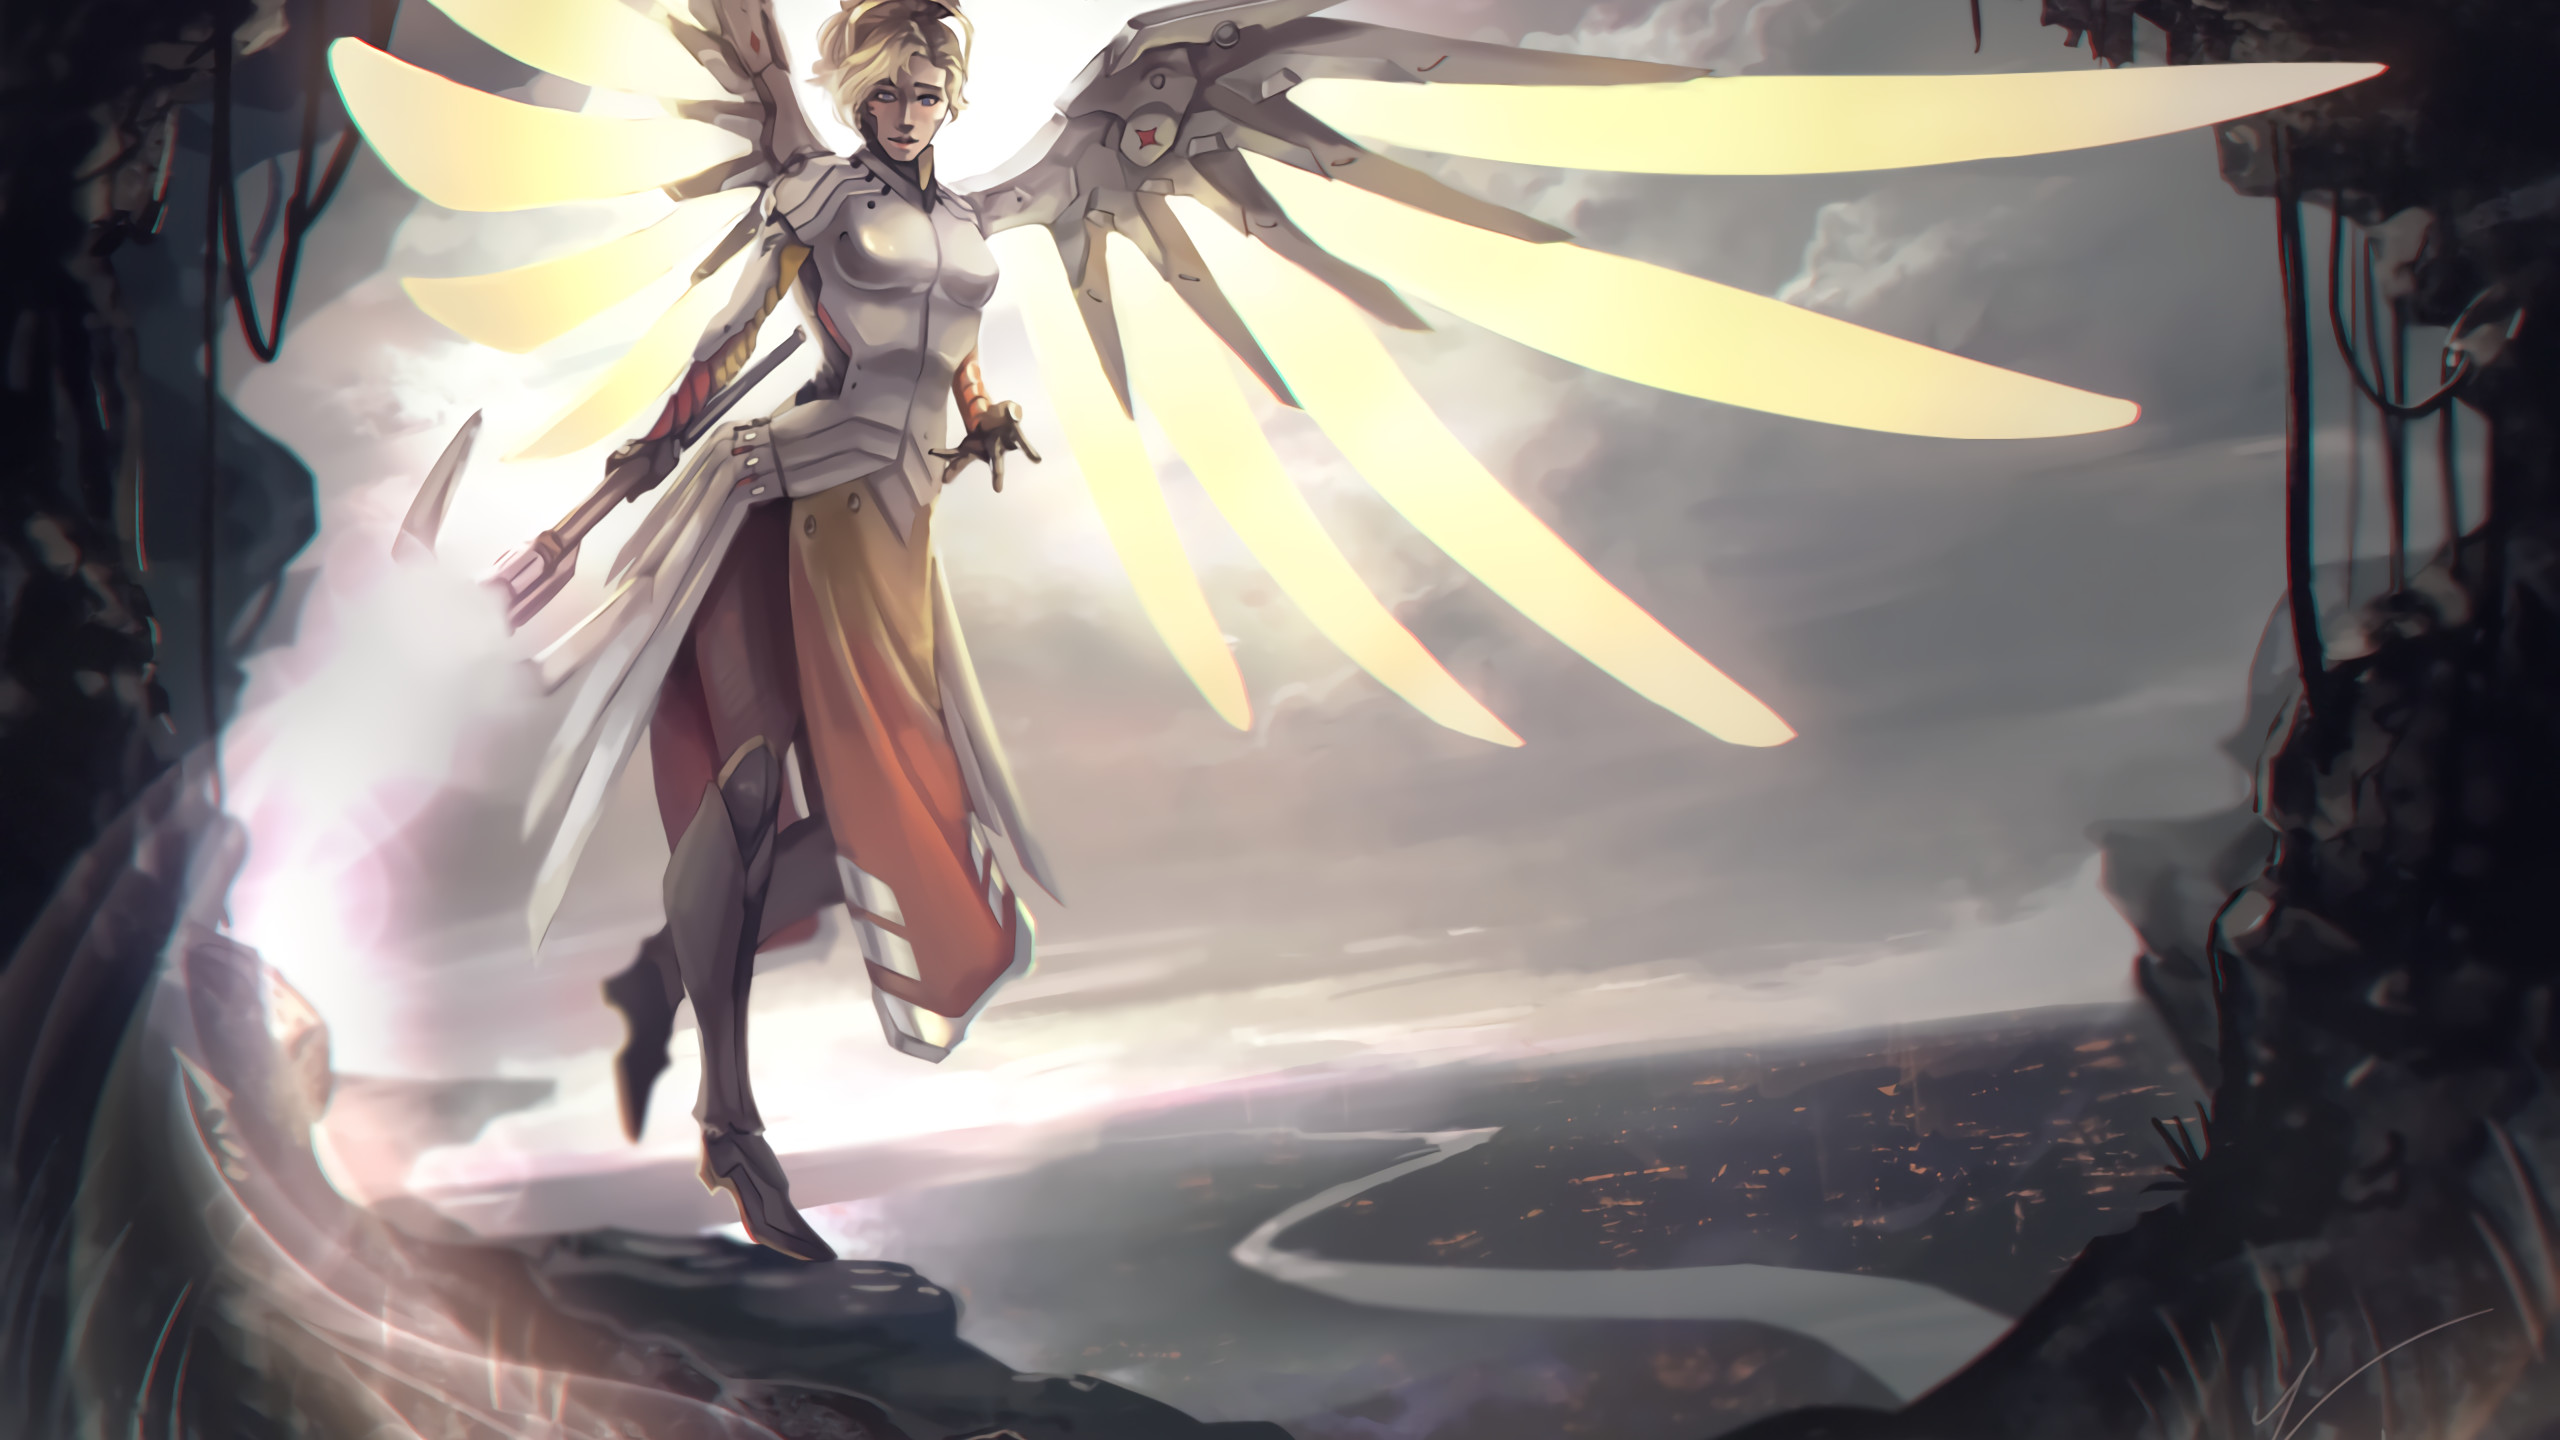 2560x1440 Overwatch, Mercy, Wings, Cave, Artwork, Armored, Light, Clouds